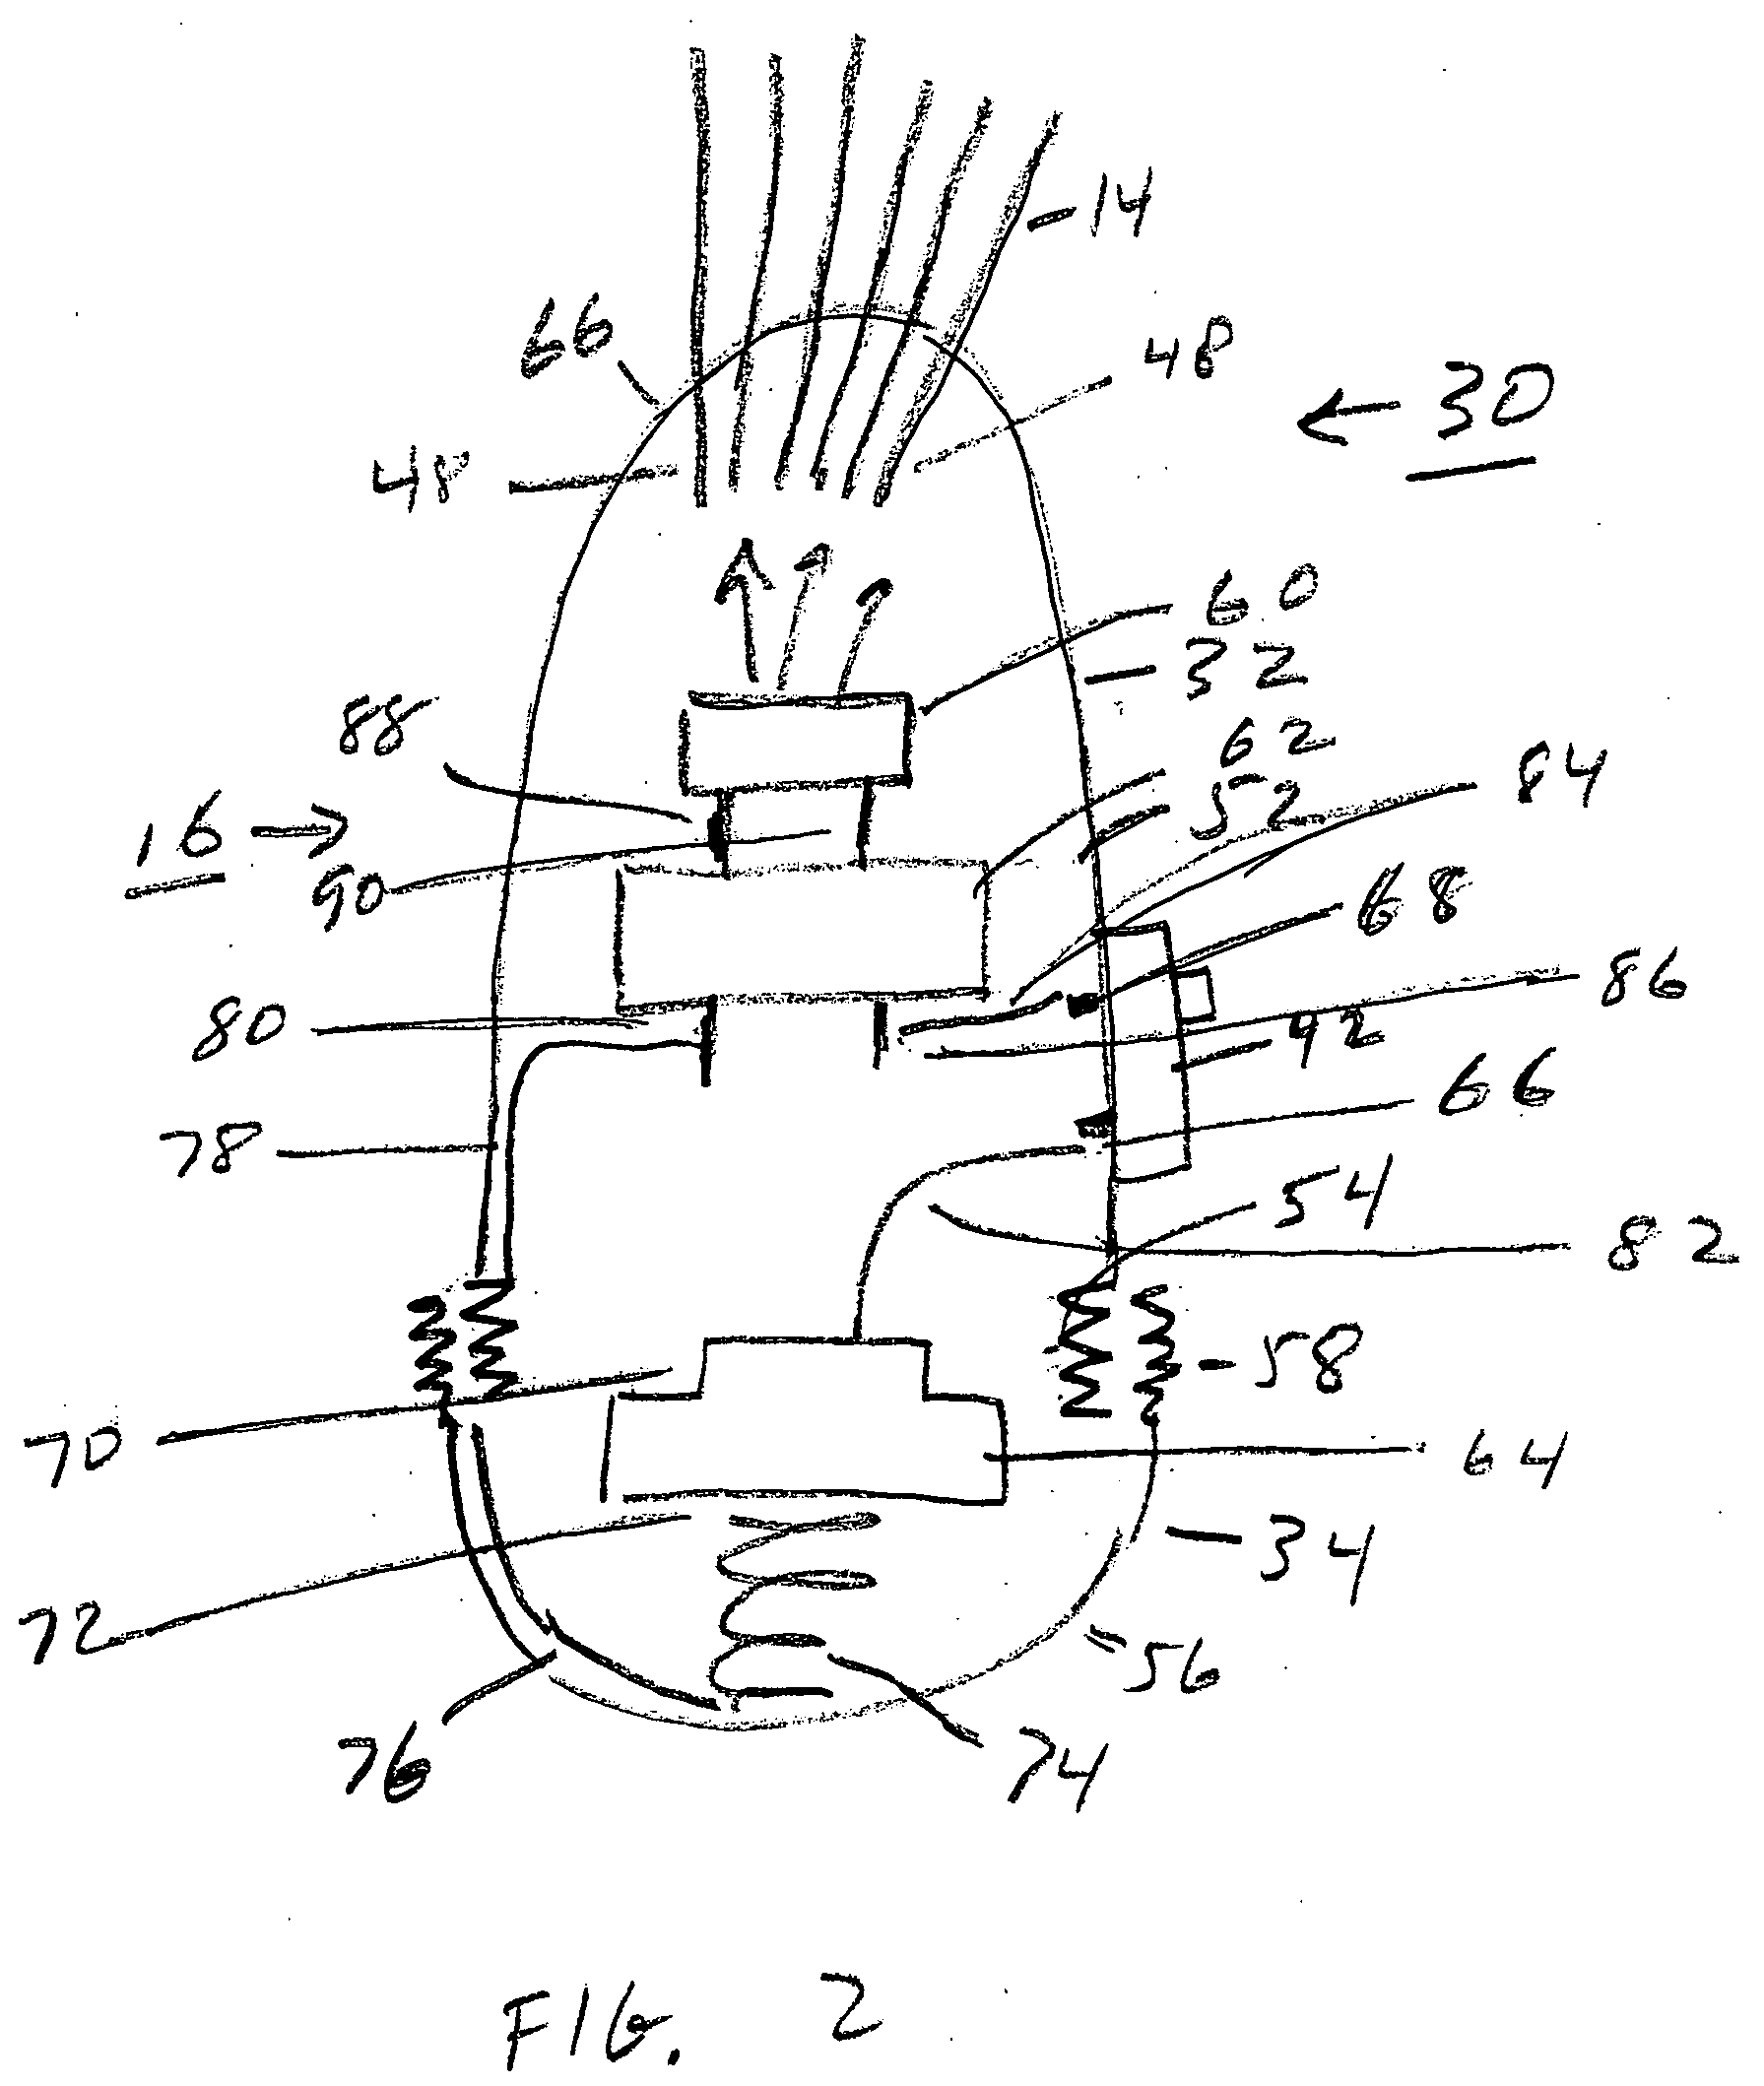 Submersible light source for an optical fiber flower display in a water-filled vase